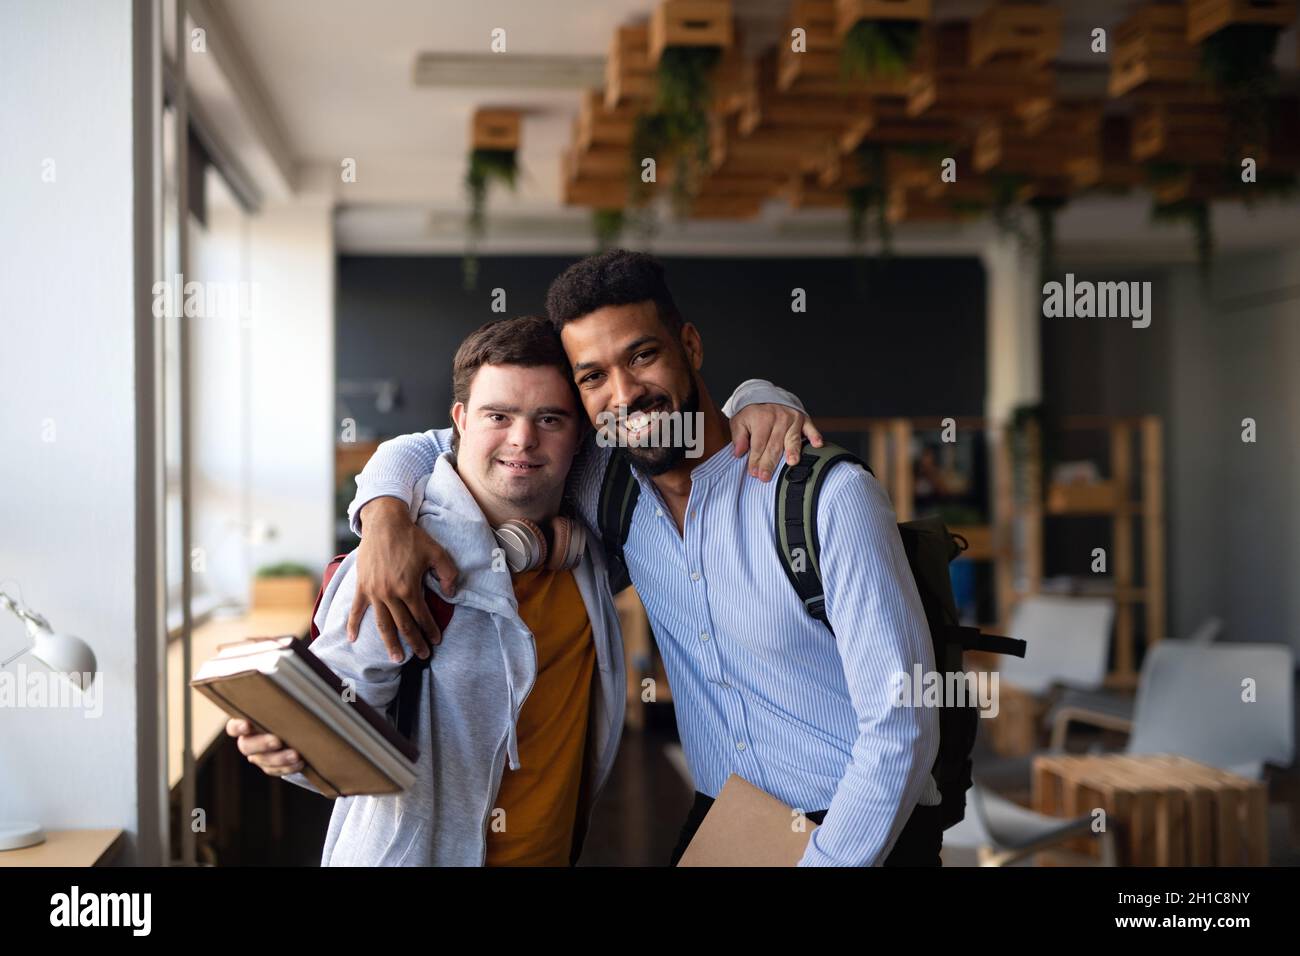 Young man with Down syndrome and his tutor with arms around looking at camera indoors at school Stock Photo